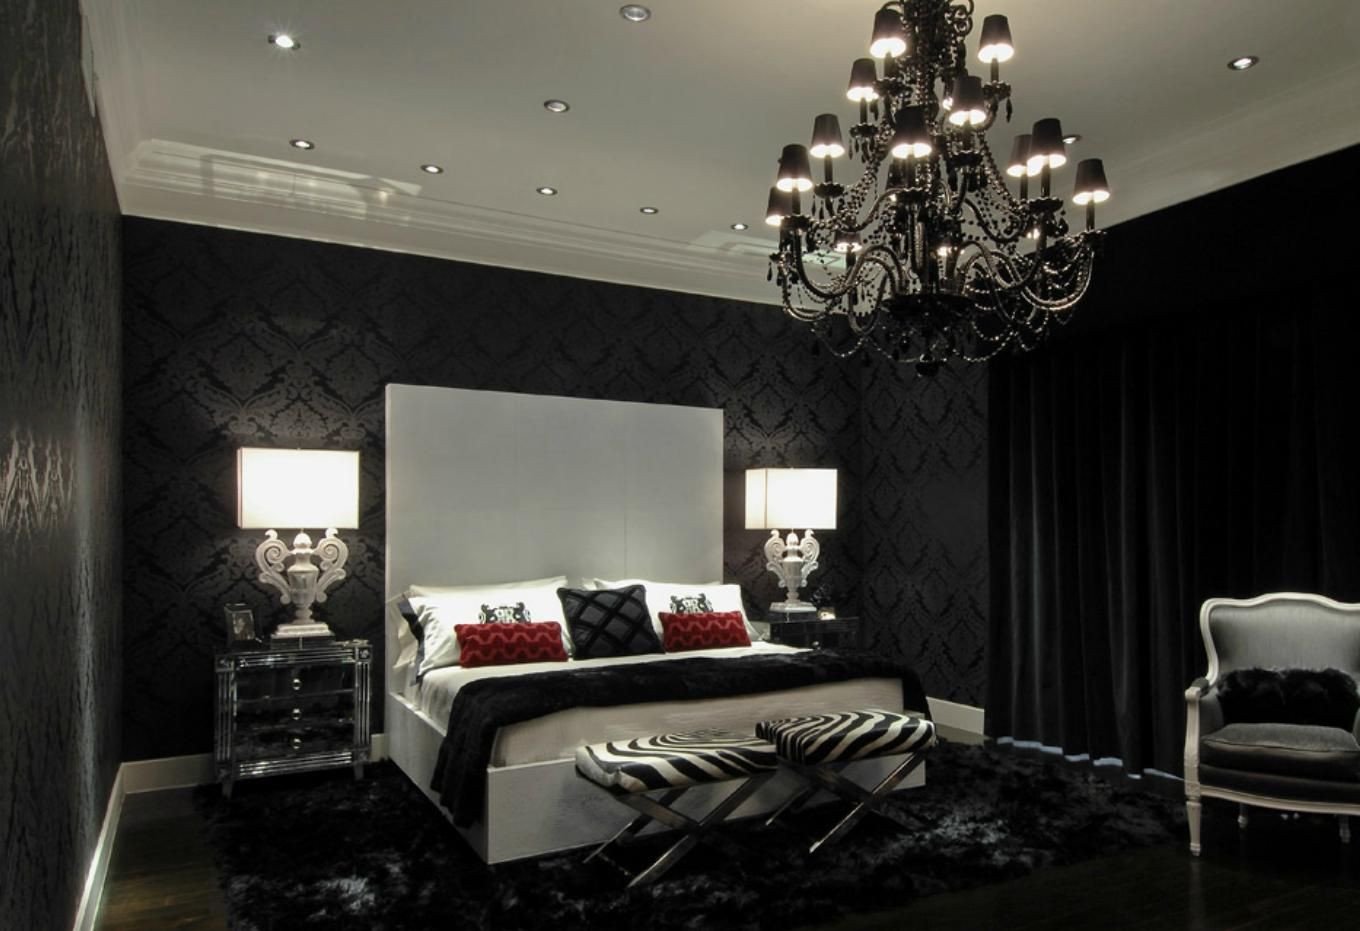 Gothic Bedroom Furniture for Sale Lovely Pin by Shawna Lee On Interior Design